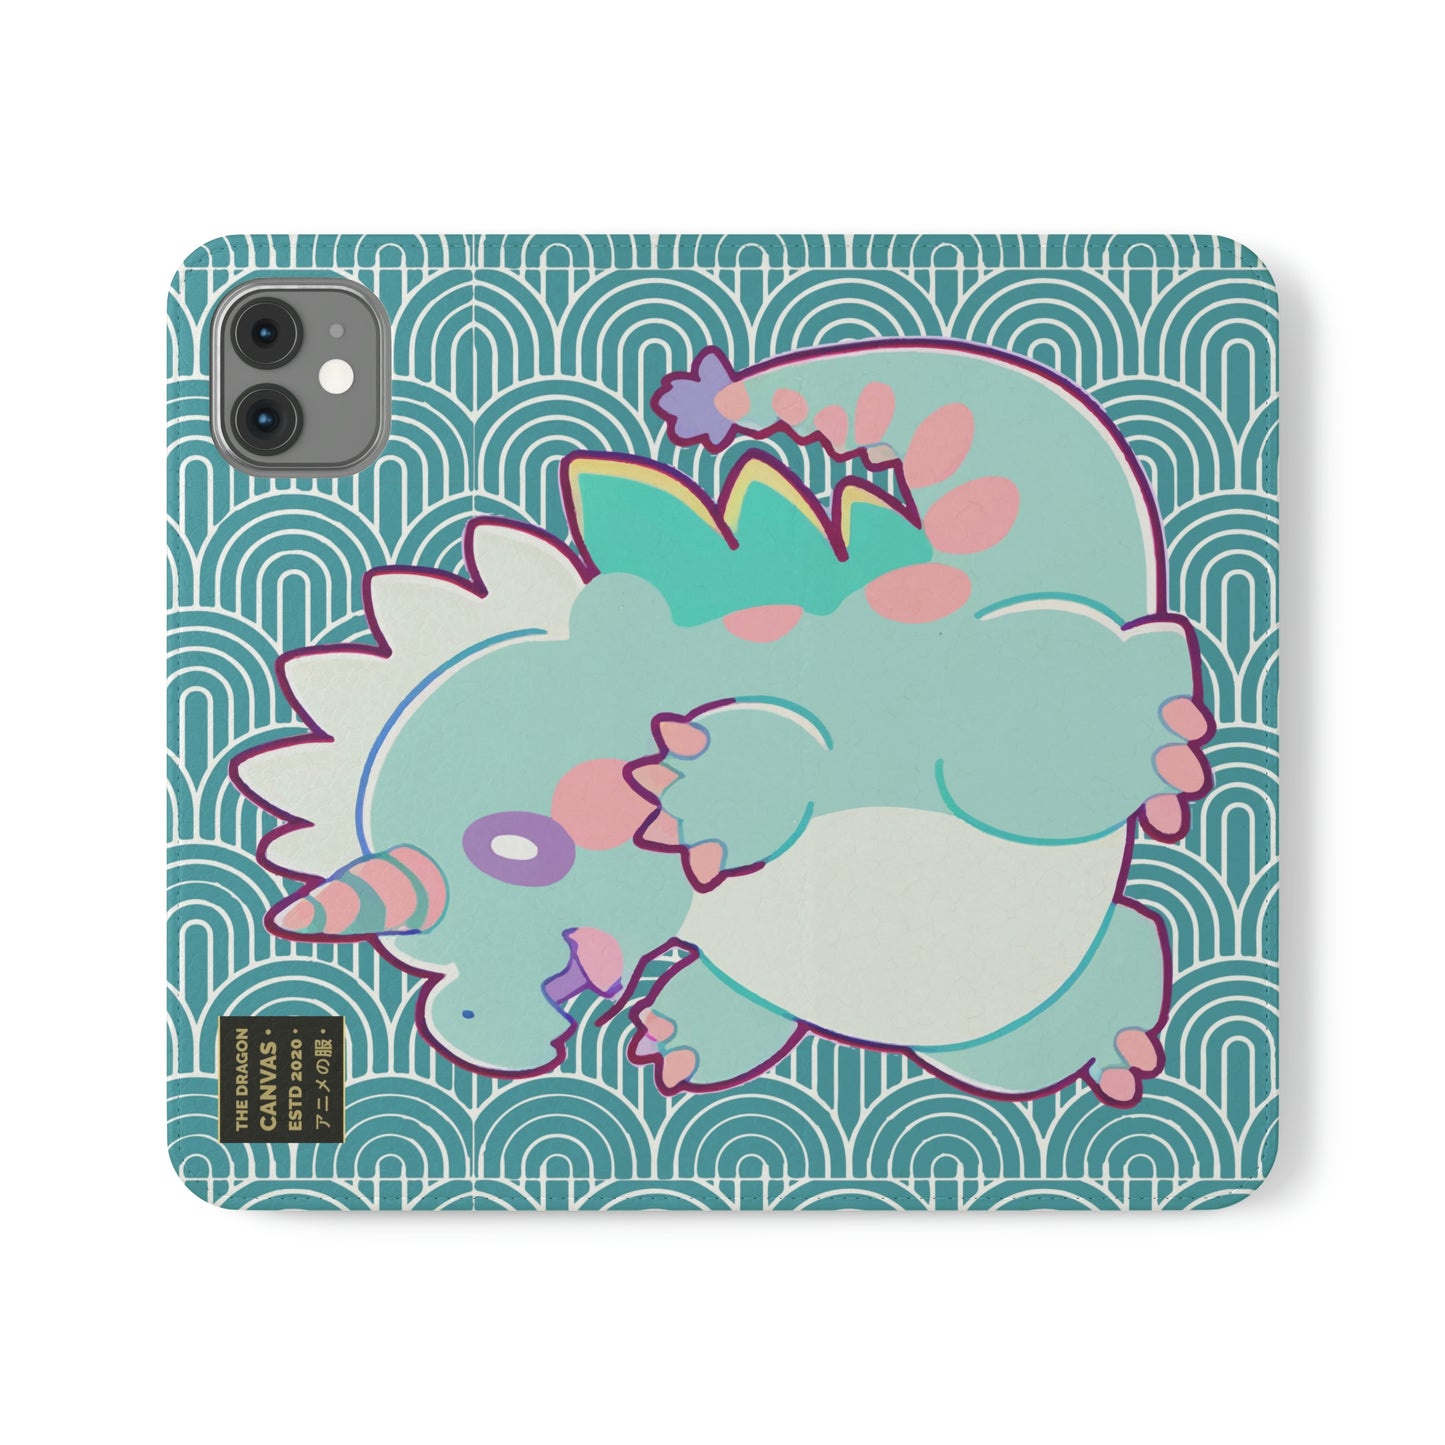 Chibi Dragons Collection #01 - Organic Flip Cases for iPhone and Samsung Galaxy